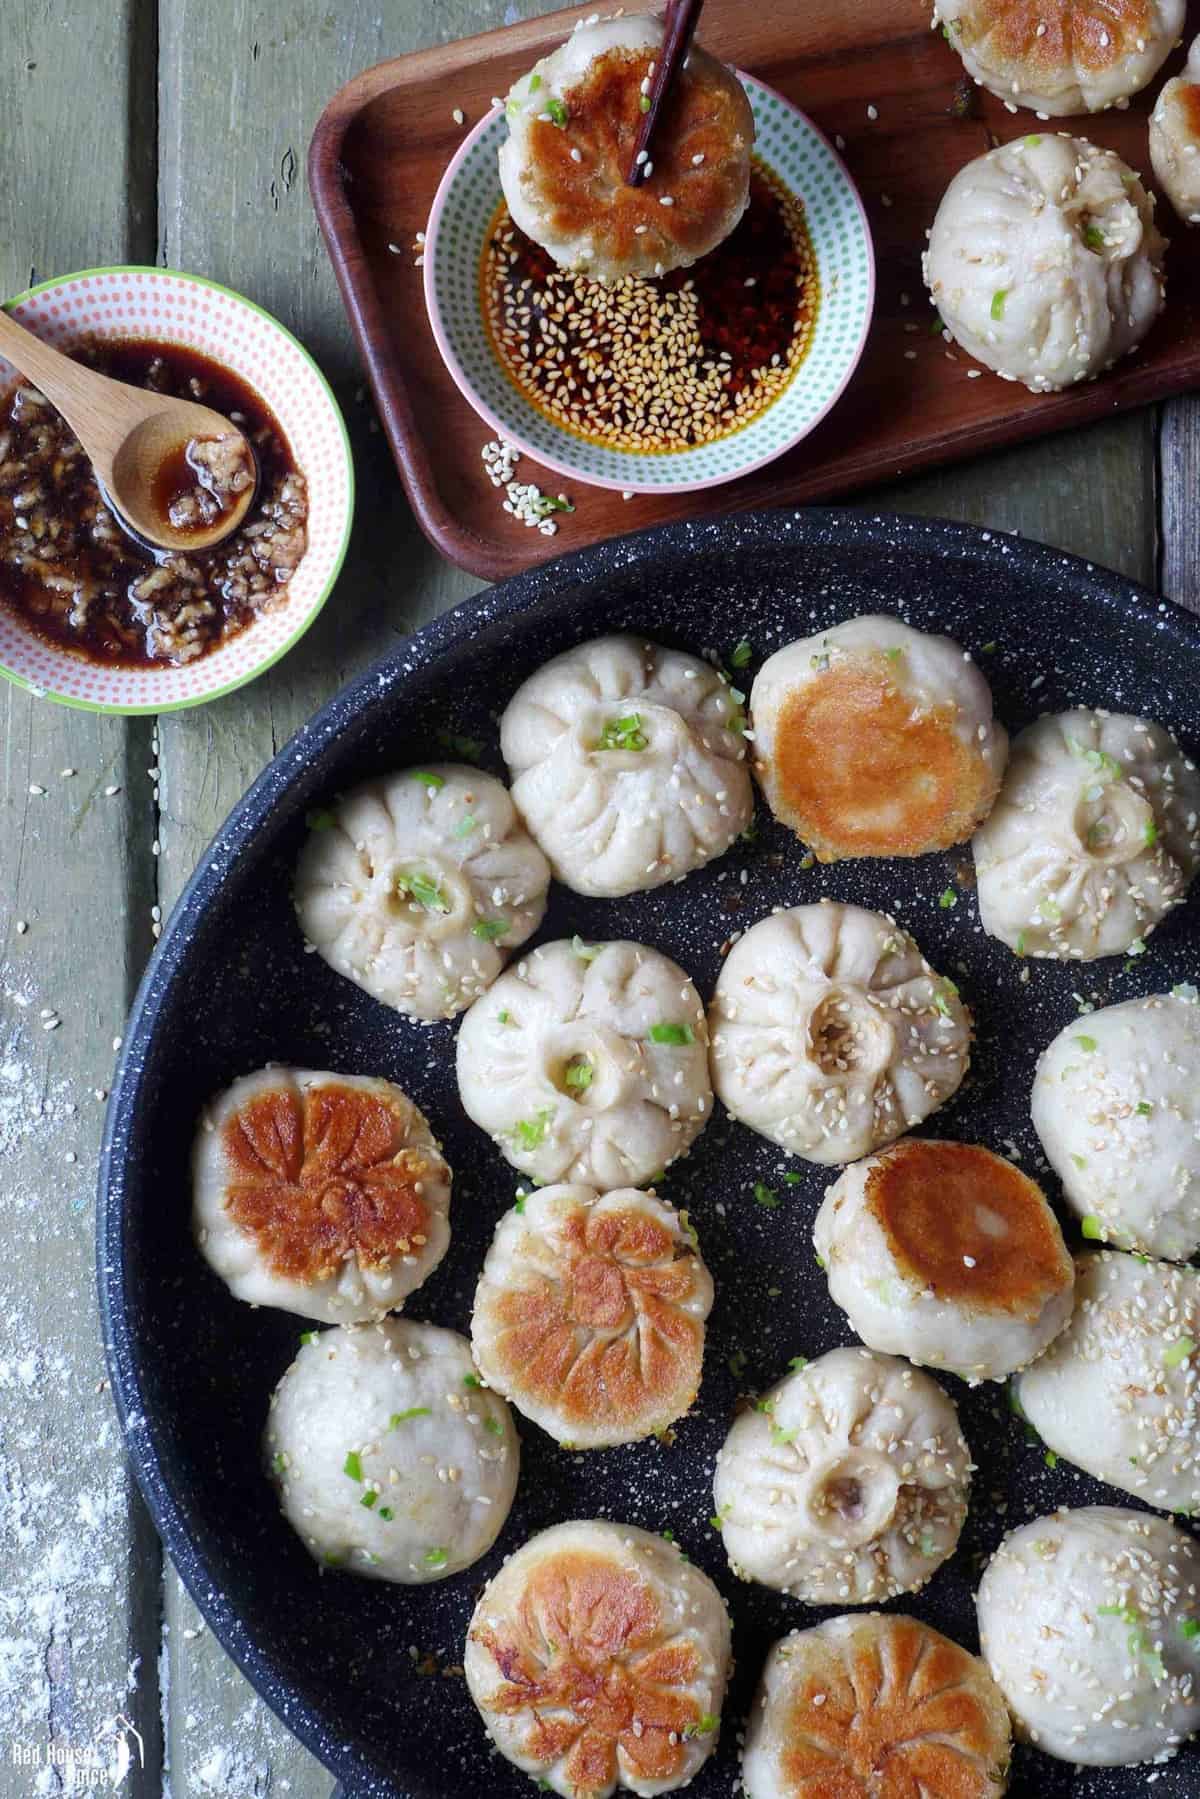 Pan fried pork buns with chili oil on the side